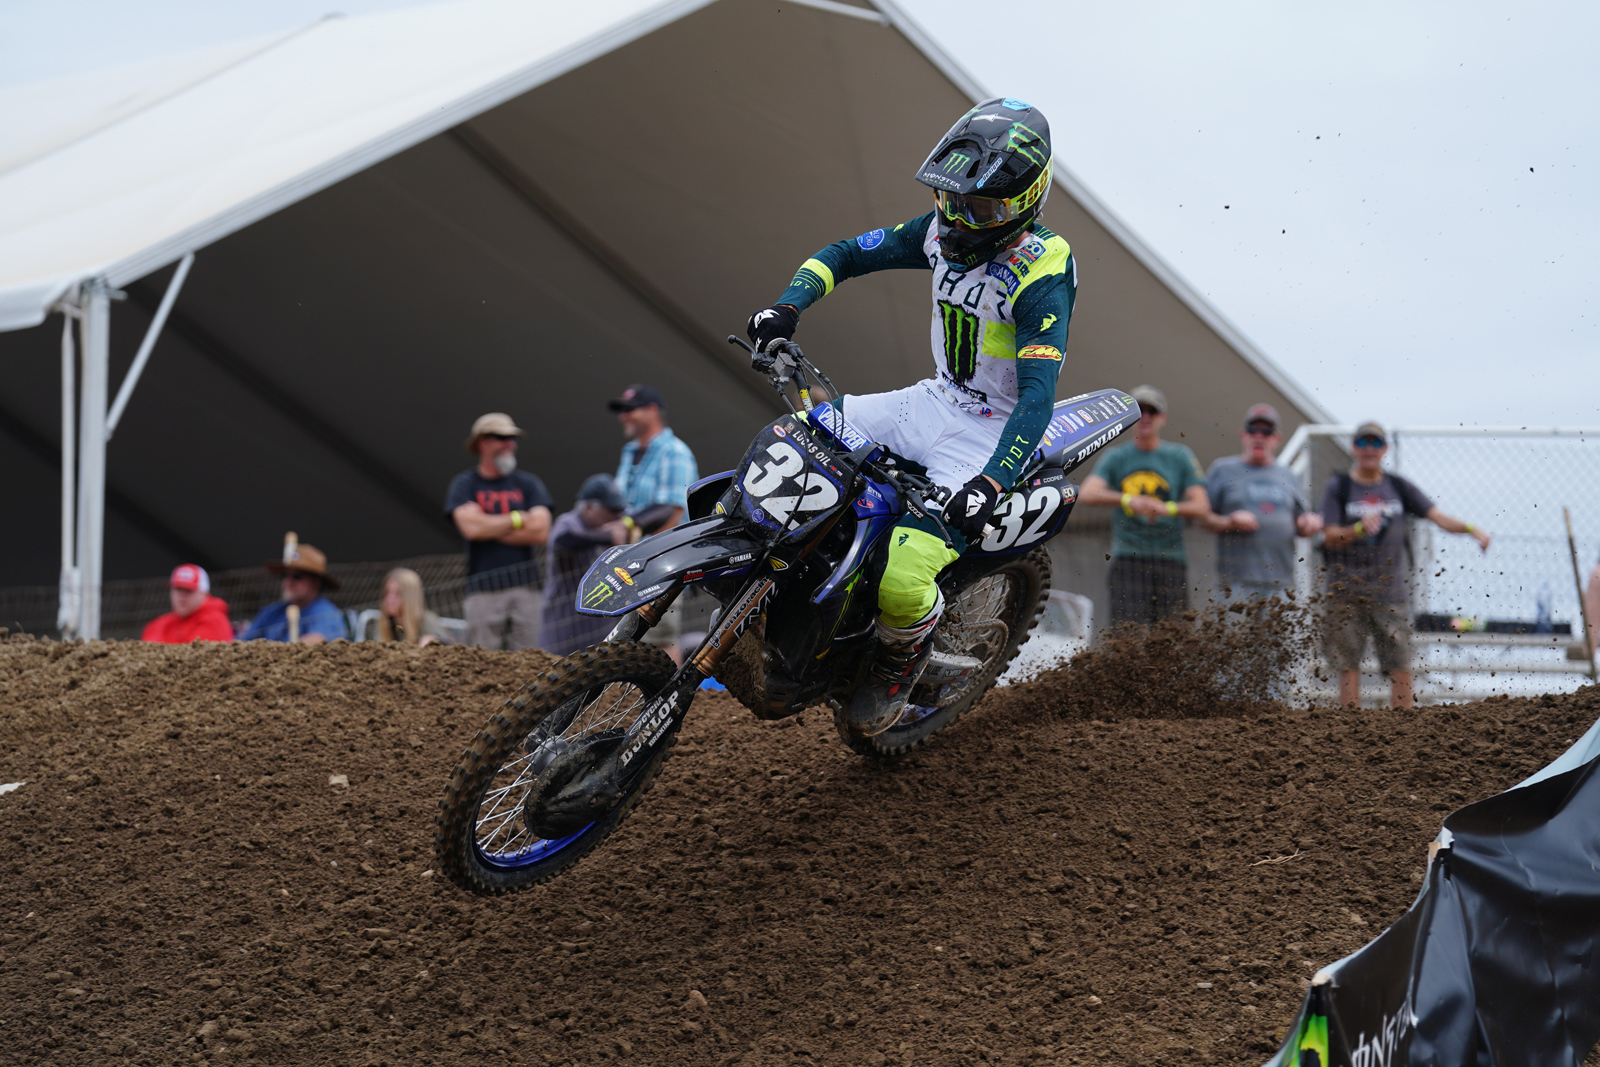 2022 Hangtown Motocross Qualifying Report and Results